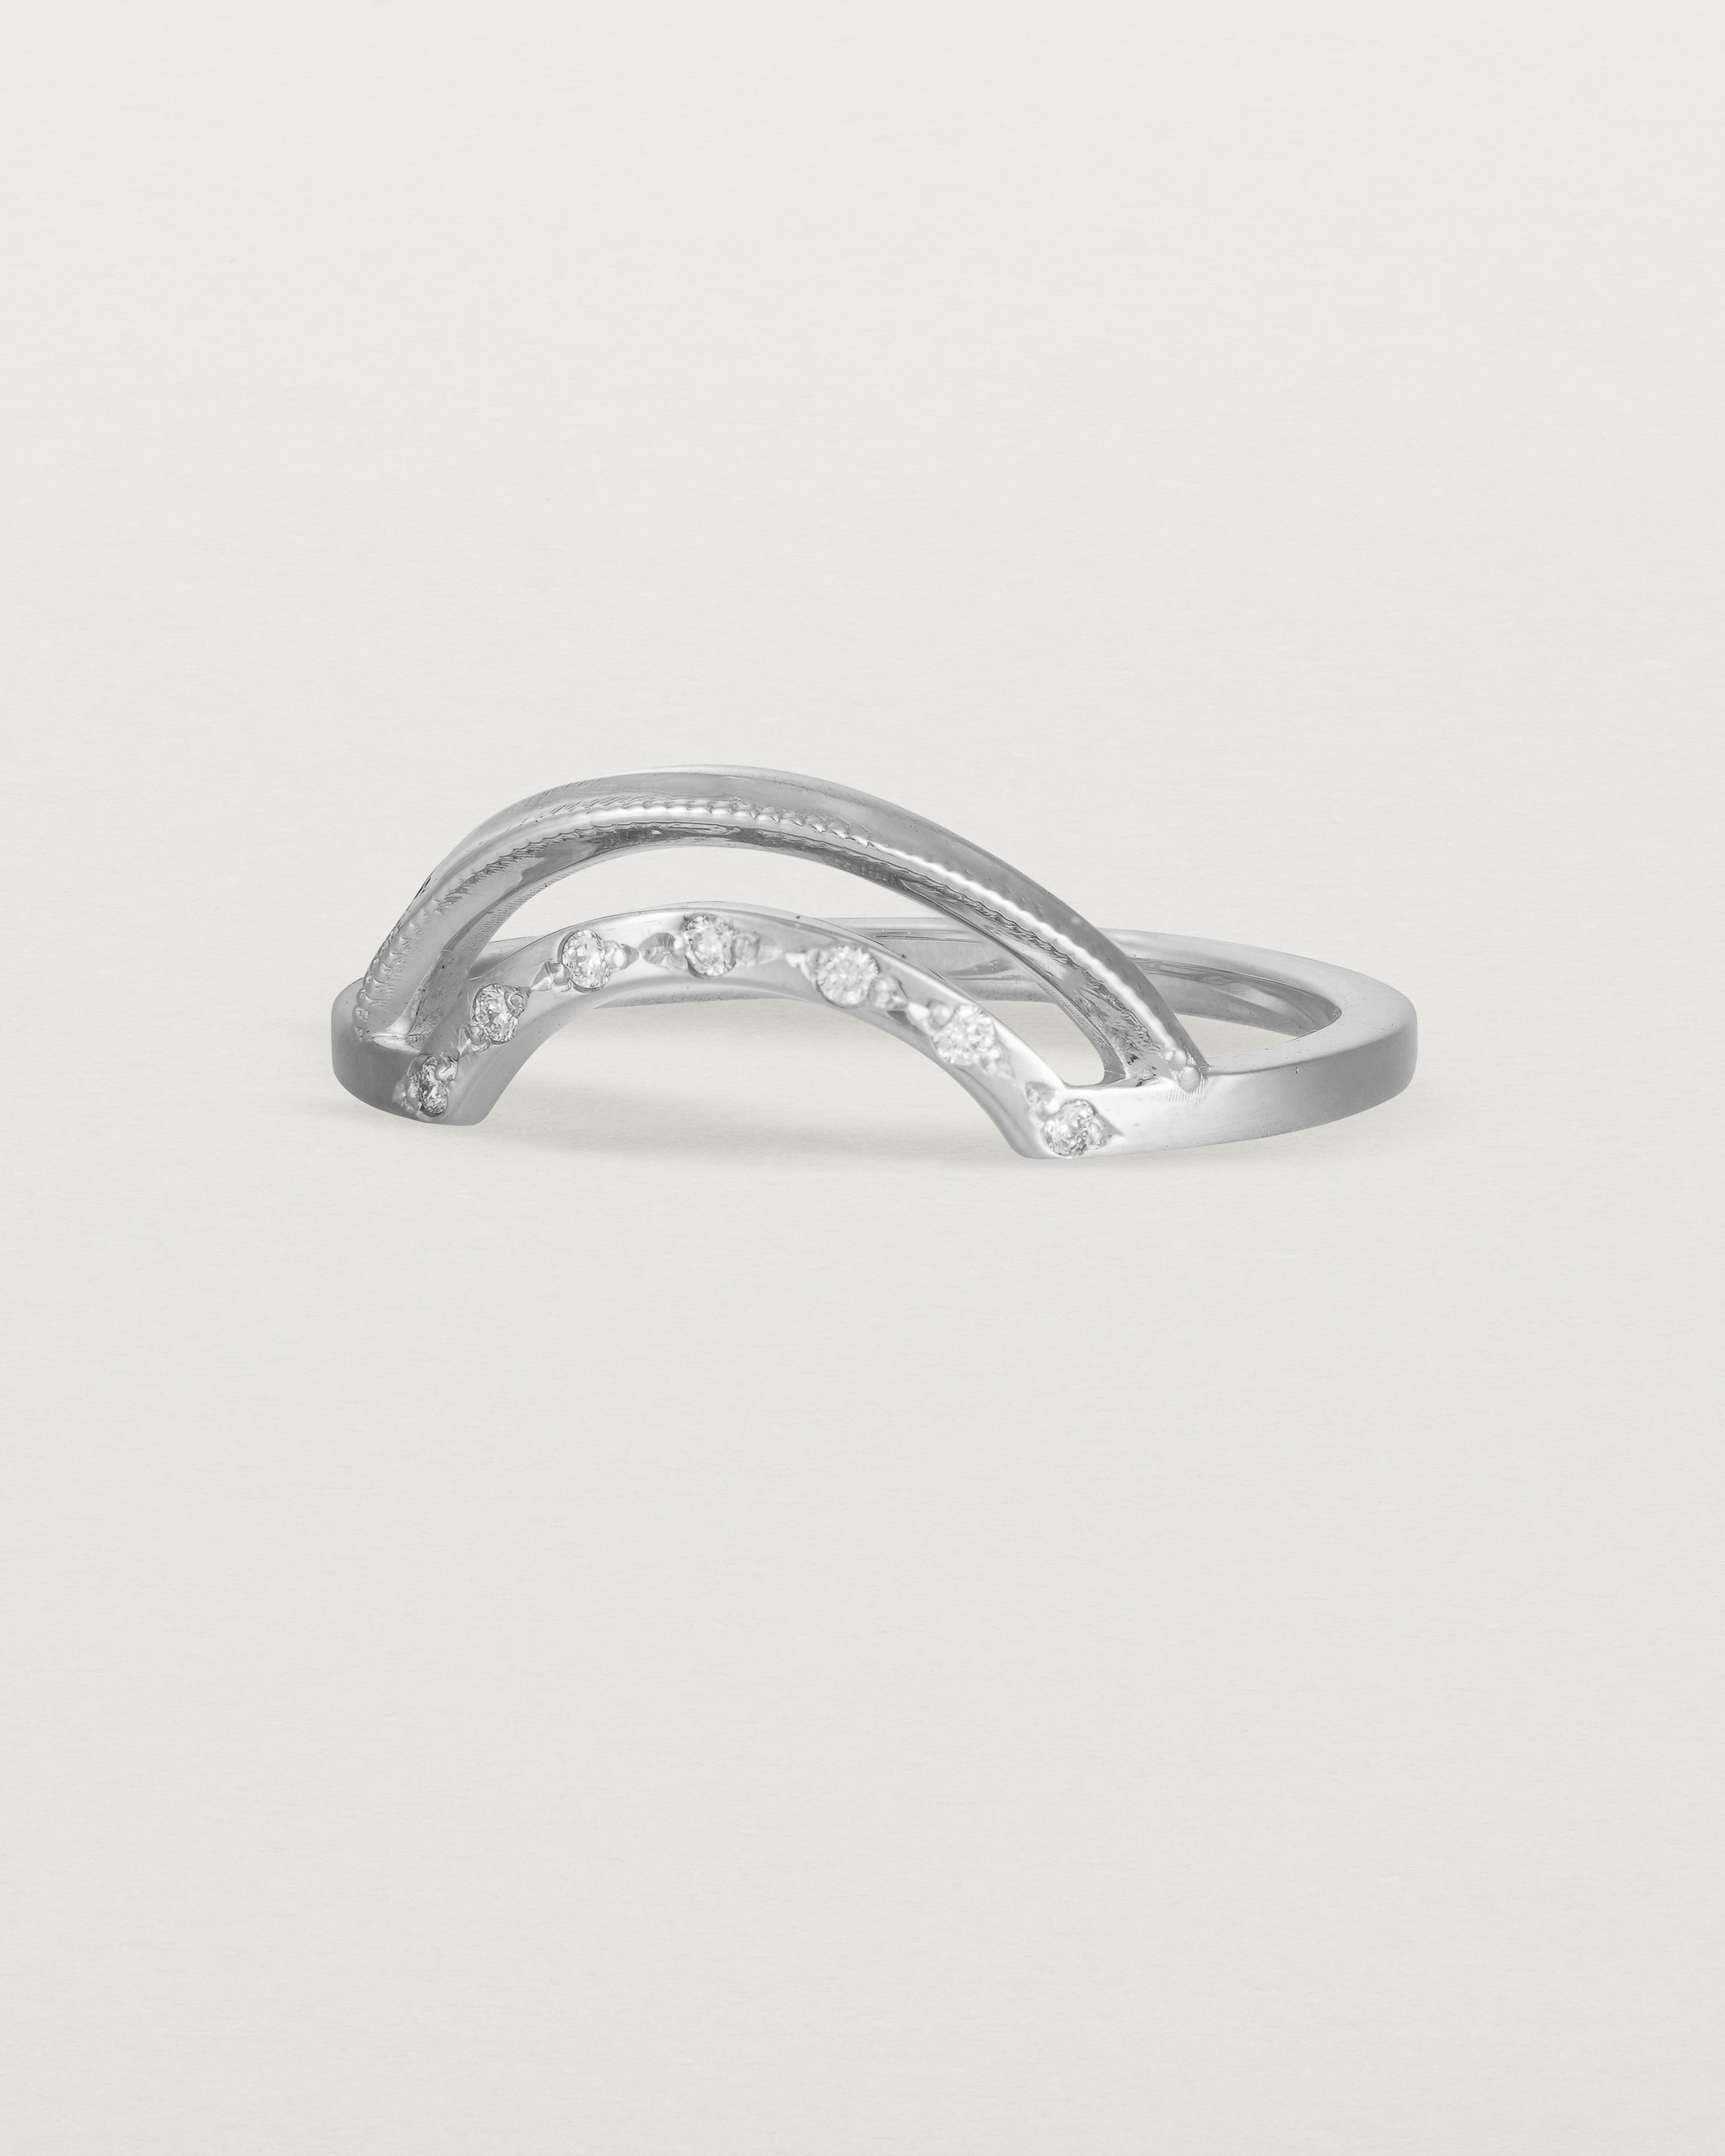 Fit four of a double arc crown ring with white diamonds adoring the inner arc - crafted in white gold.